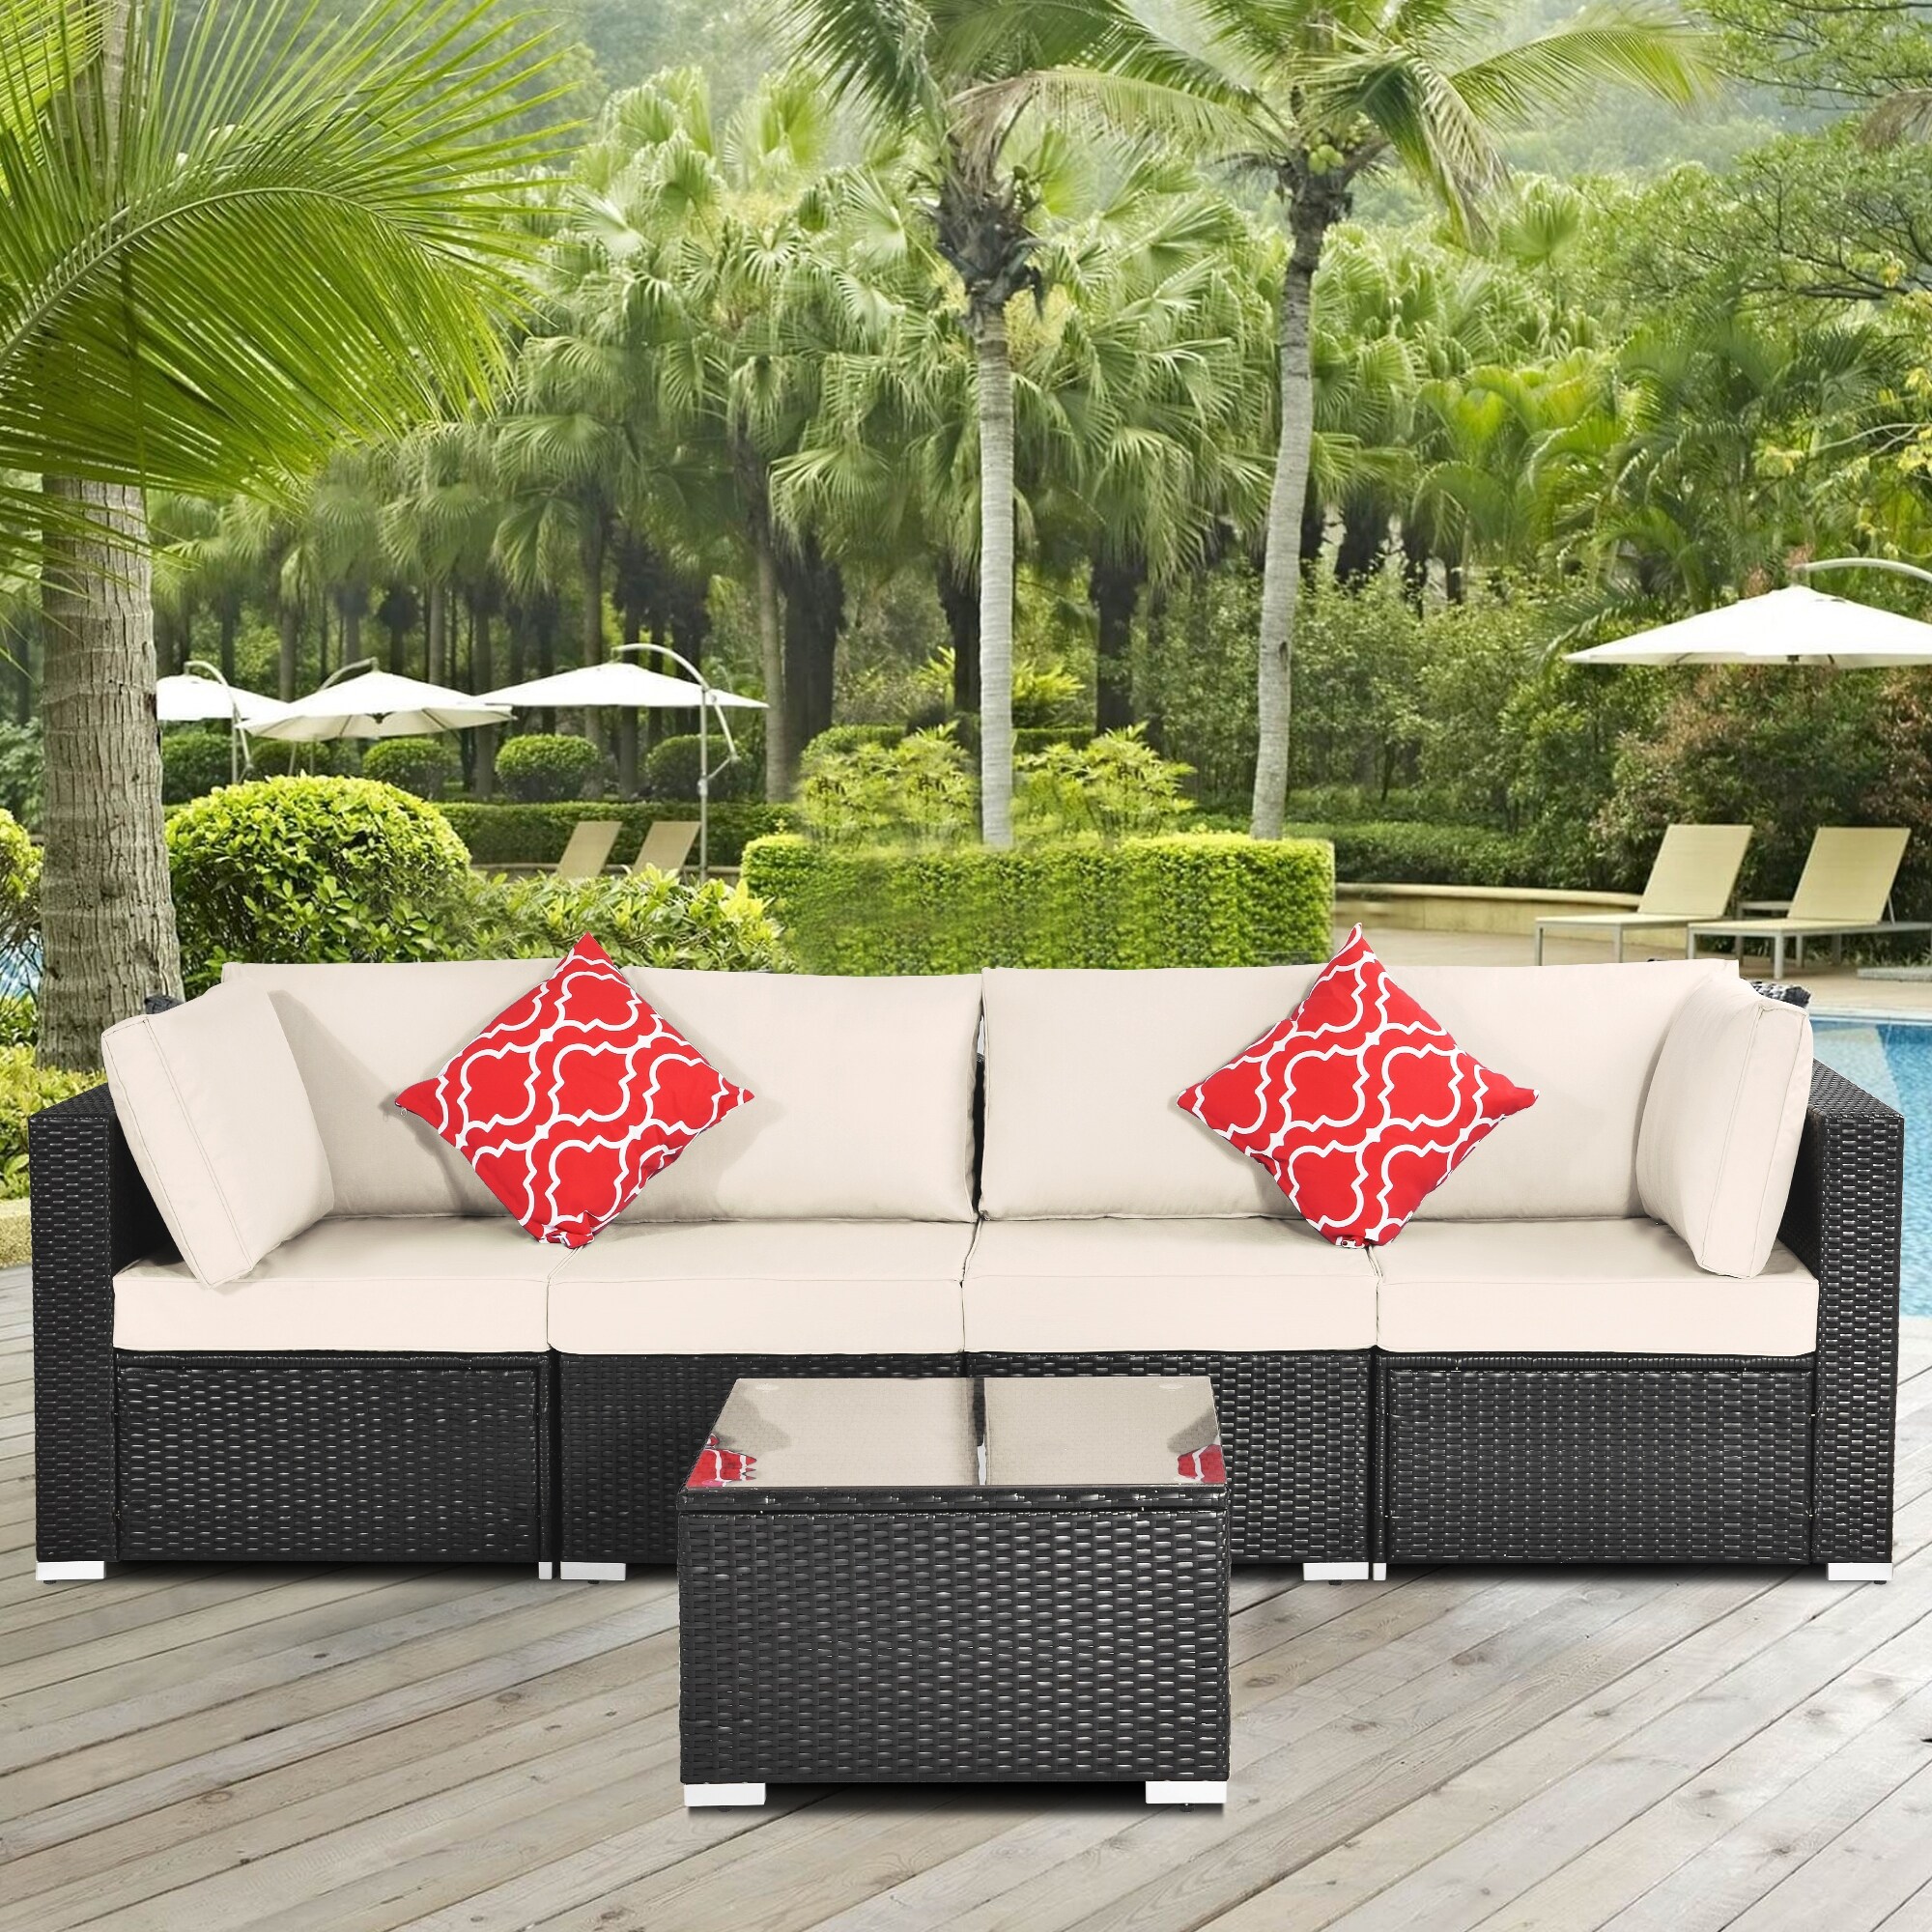 5-pieces Outdoor Patio Furniture Sets For 4-5  Garden Sofa Set With 2 Single Sofa Chair  2 Single Corner Chair and 1 Coffee Table.